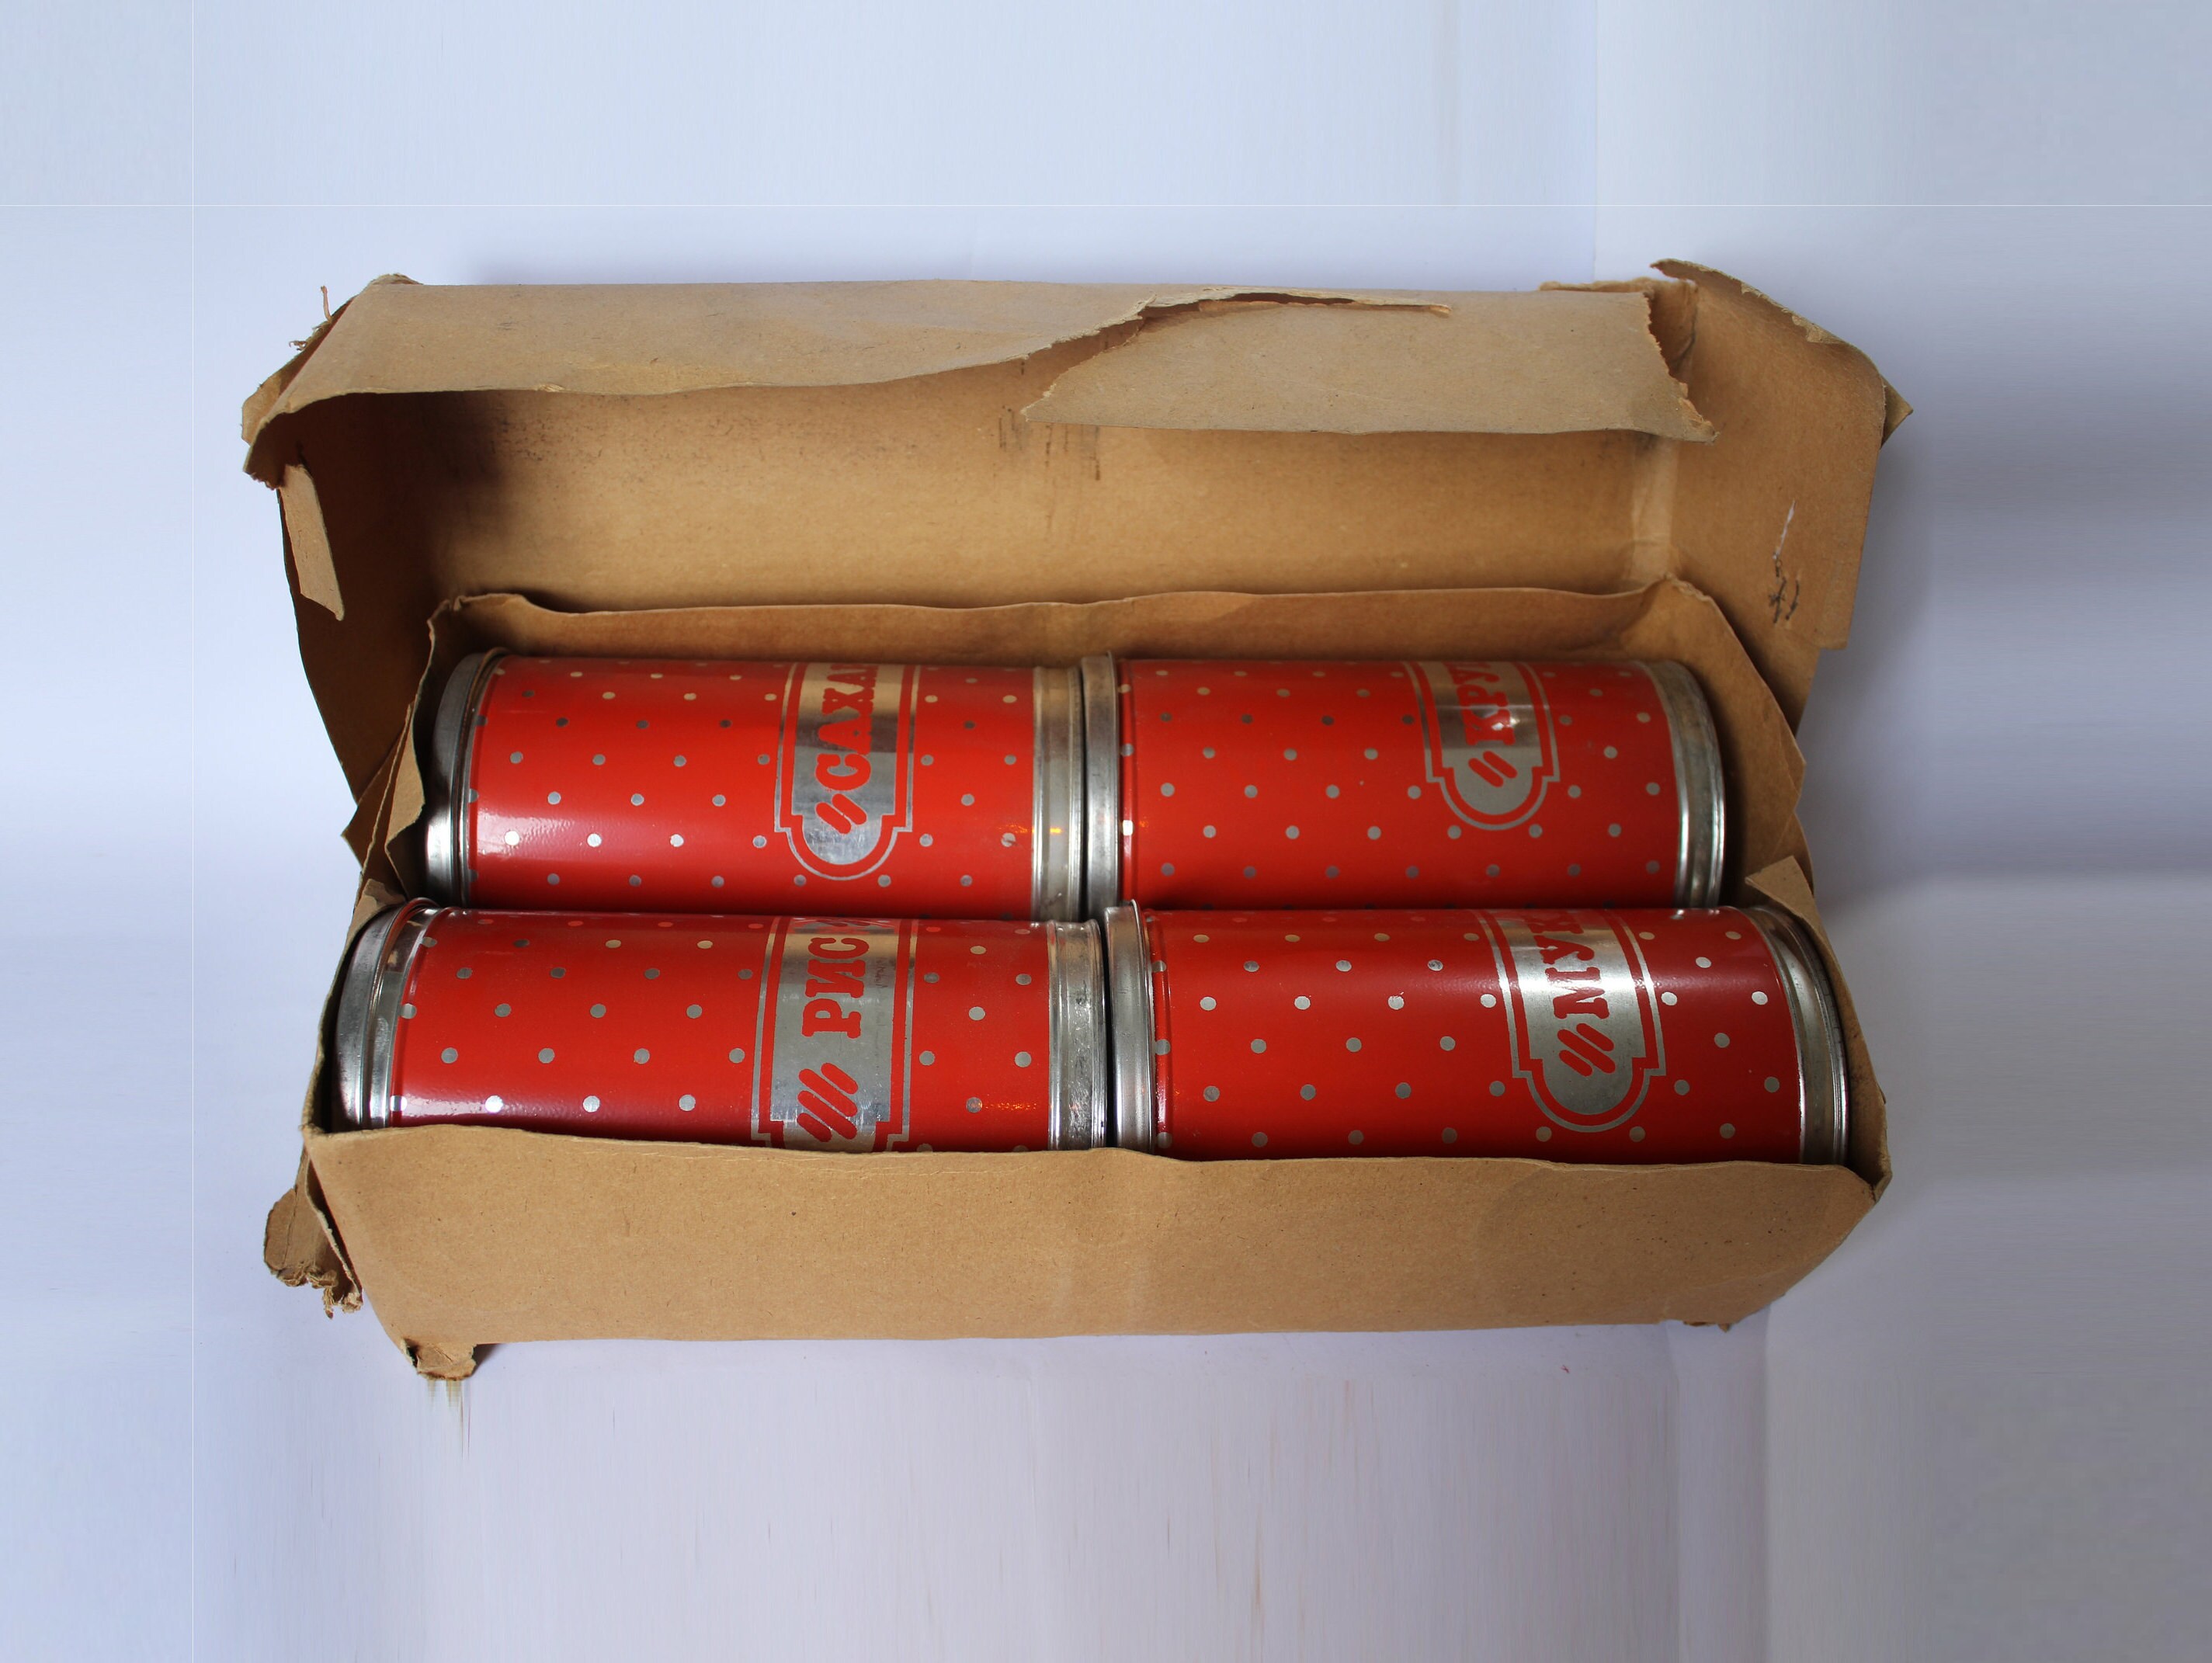 Soviet Tin Boxes Set of 2 New Vintage Soviet Polka Dot Red Tin Boxes for  Kitchen Decor Made in USSR in 1970s 